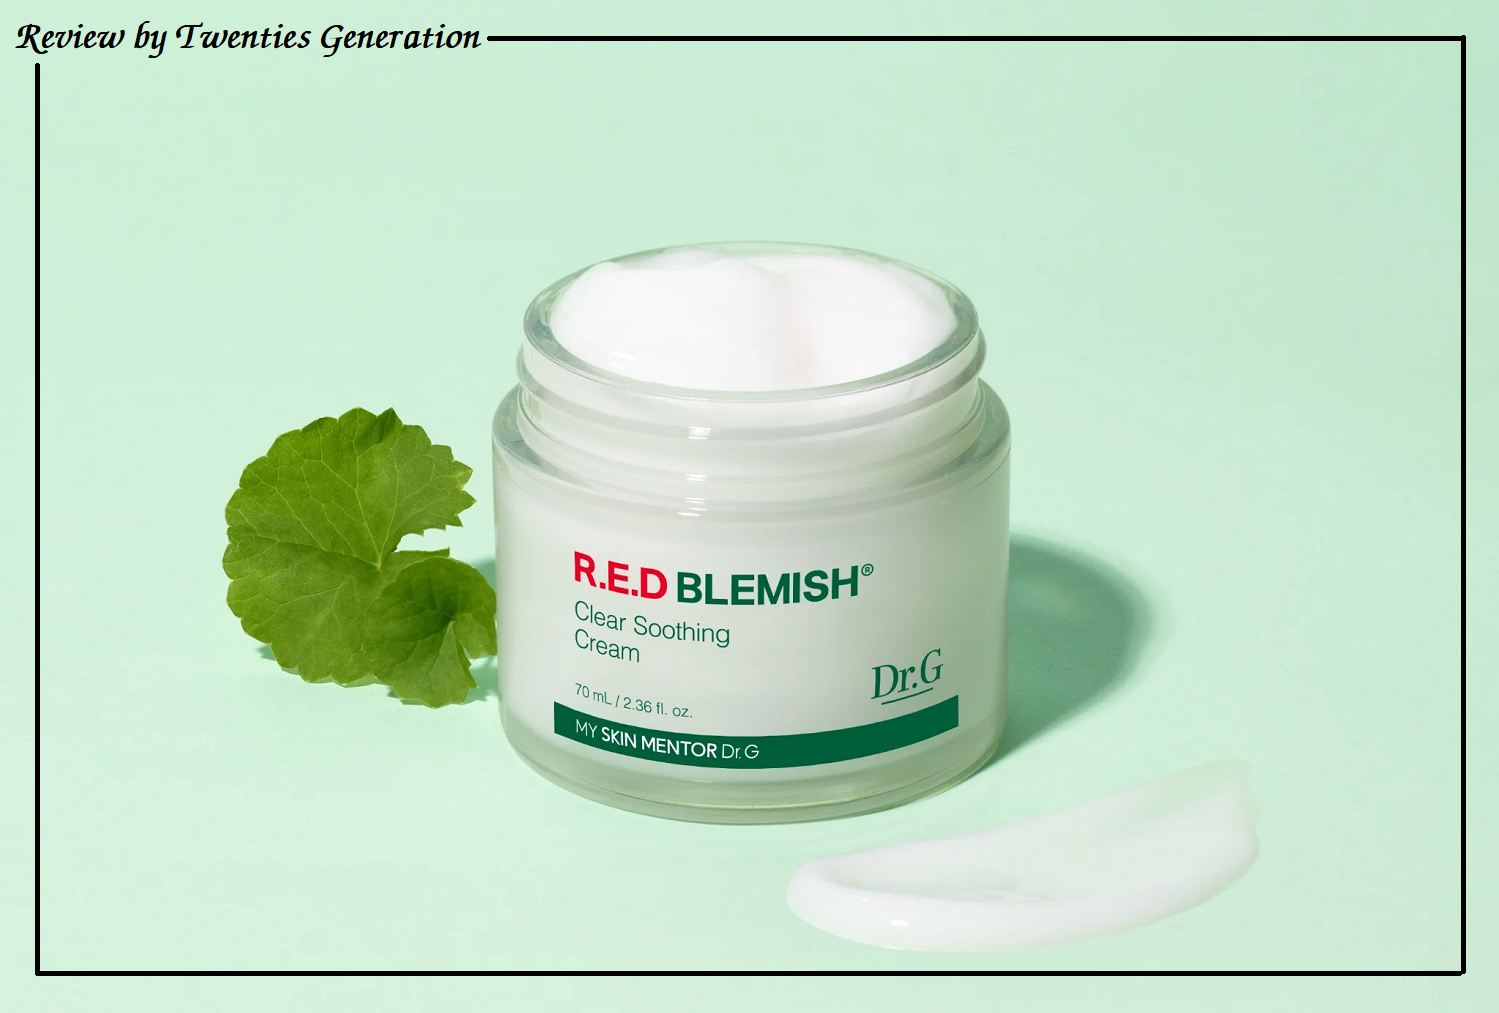 Dr.G R.E.D Blemish Clear Soothing Cream Ingredients